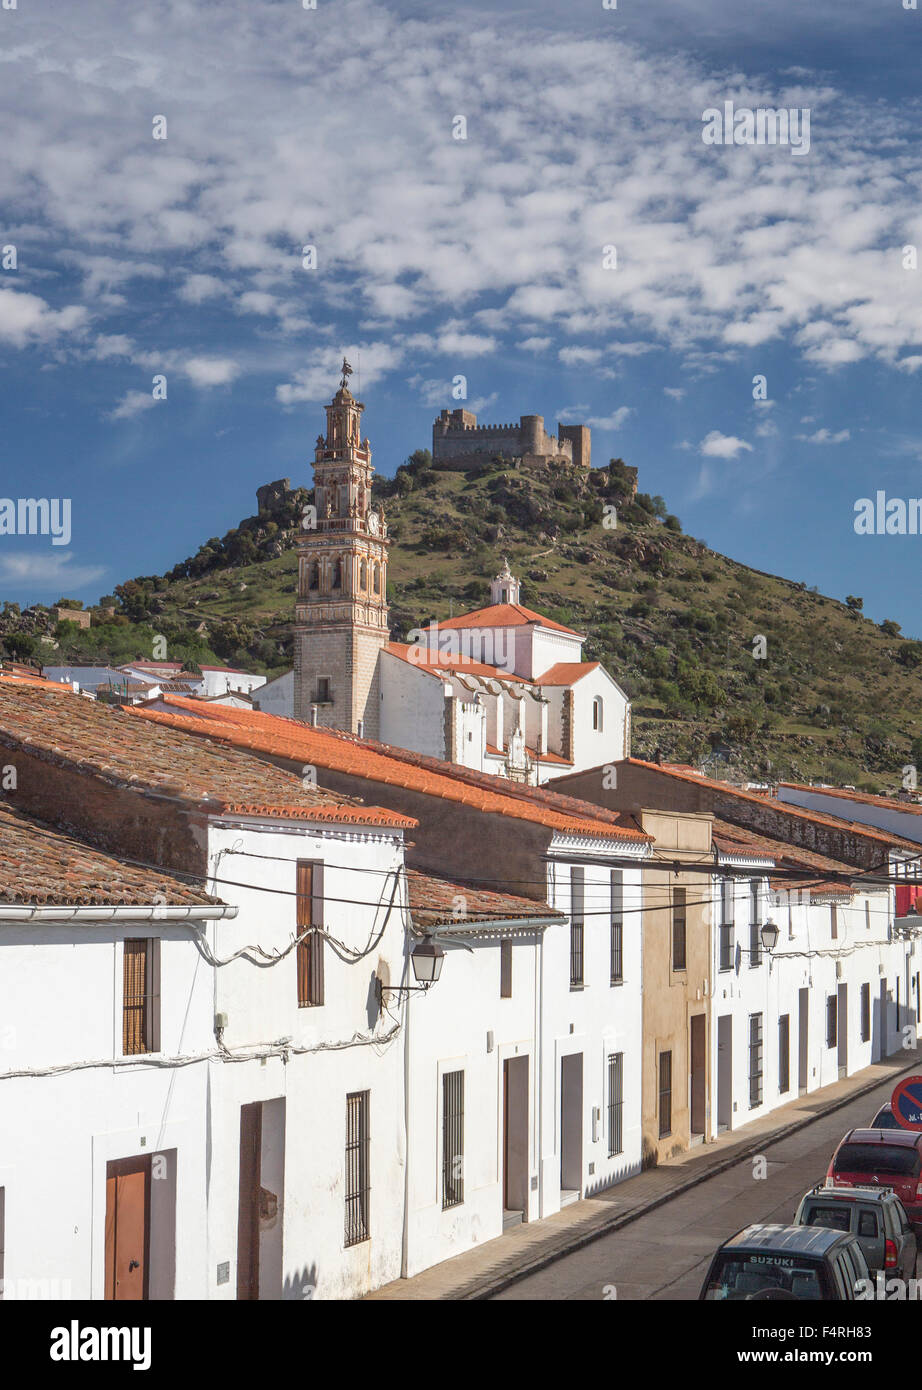 Burguillos, Extremadura, Region, Hill, Landscape, Spain, Europe, Spring, architecture, belfry, castle, church, colourful, no peo Stock Photo